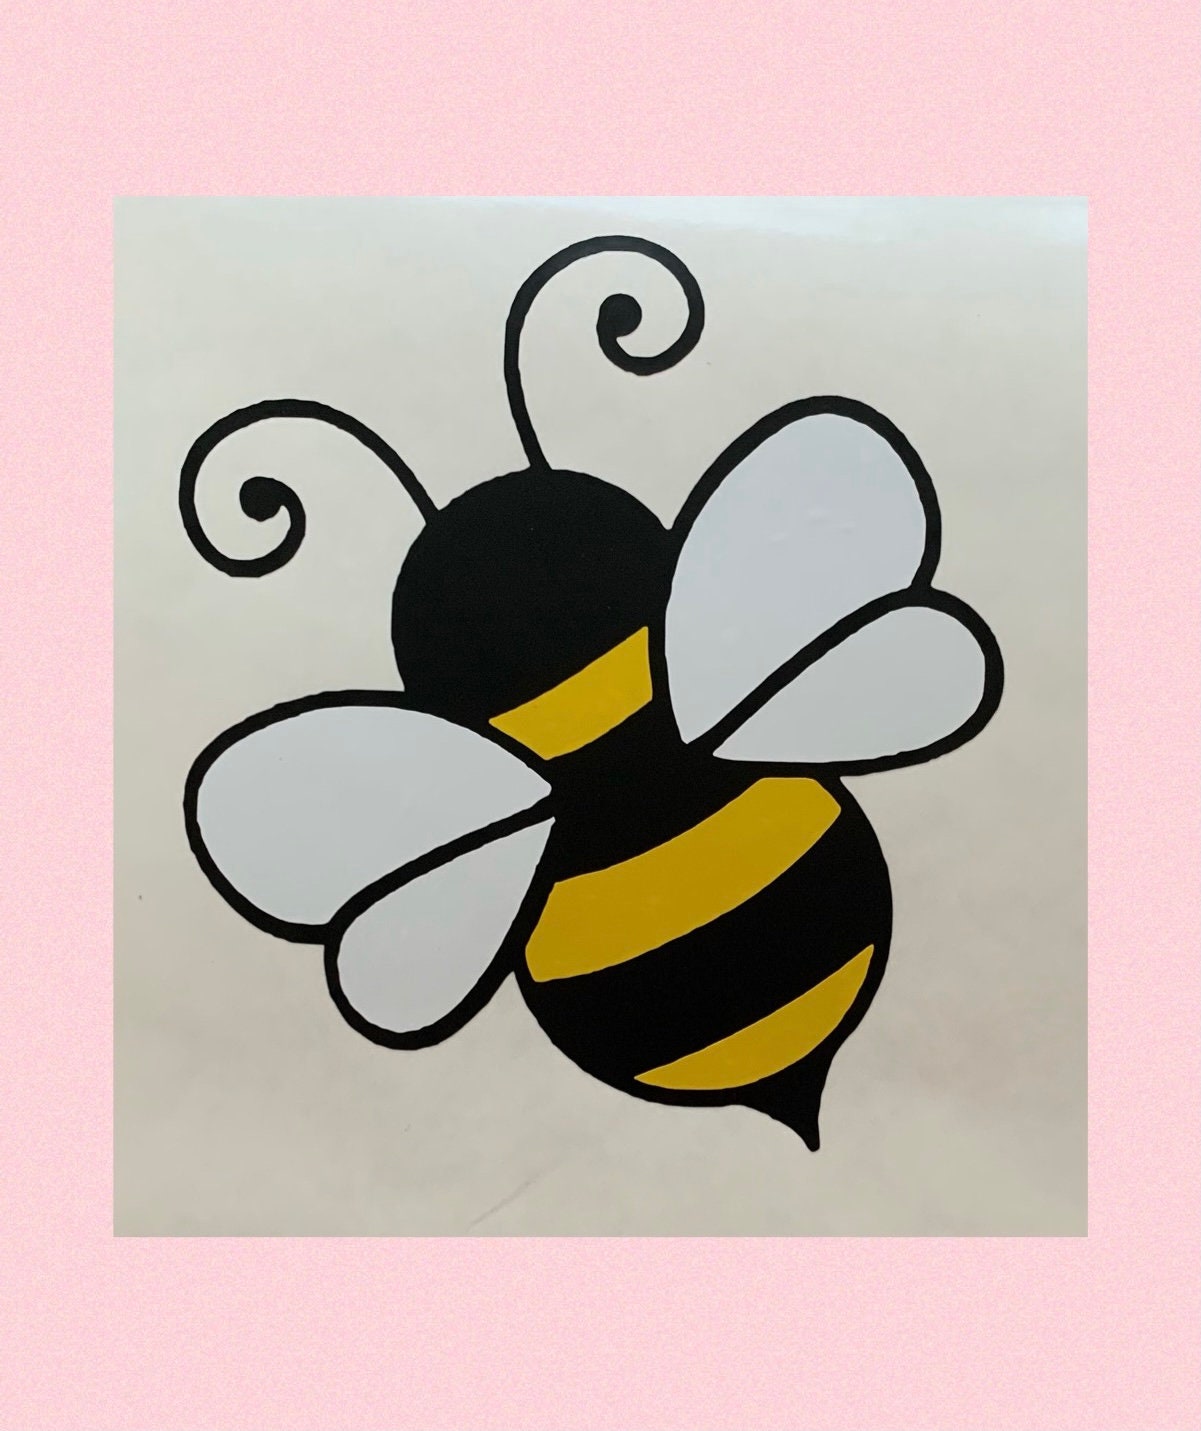 bee-cute-vinyl-sticker-label-decal-bumble-bees-home-garden-etsy